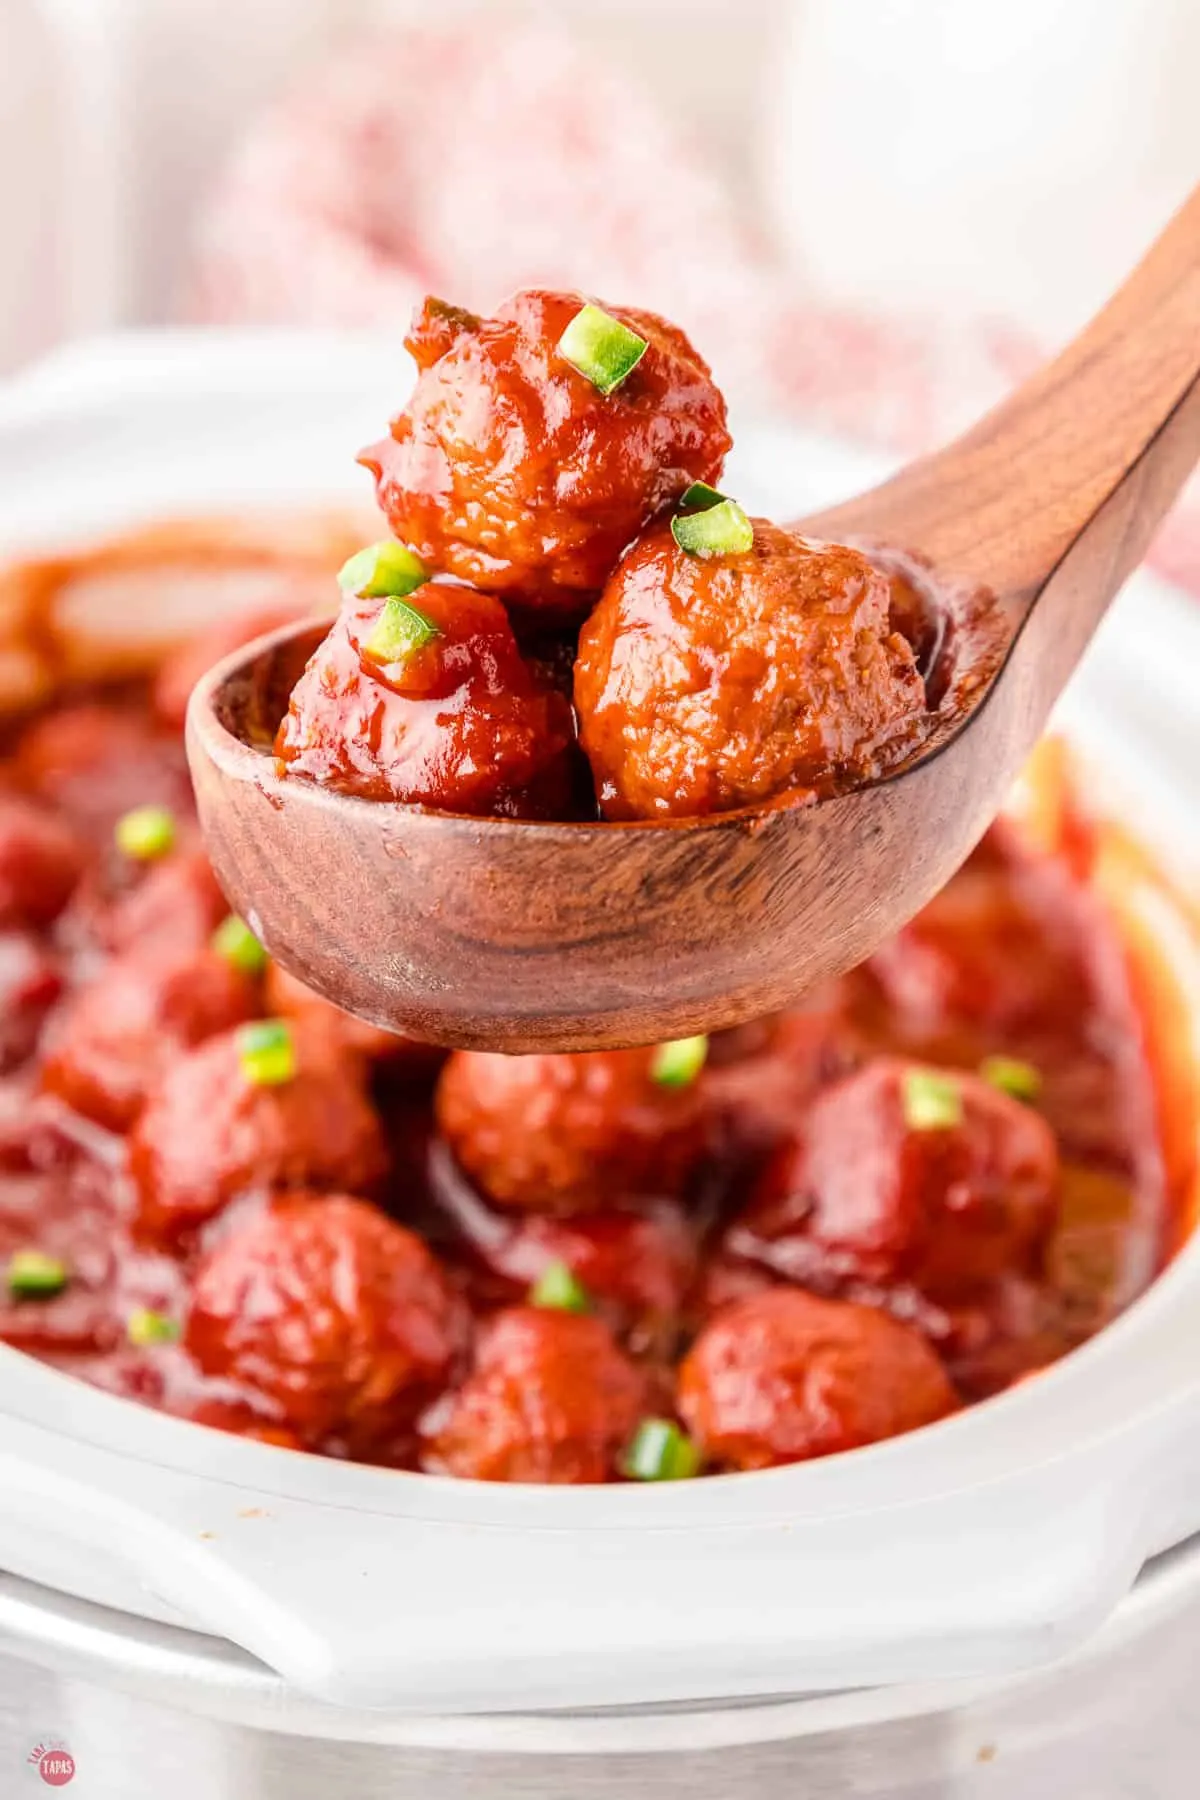 cranberry jalapeno meatballs make a delicious side dish.